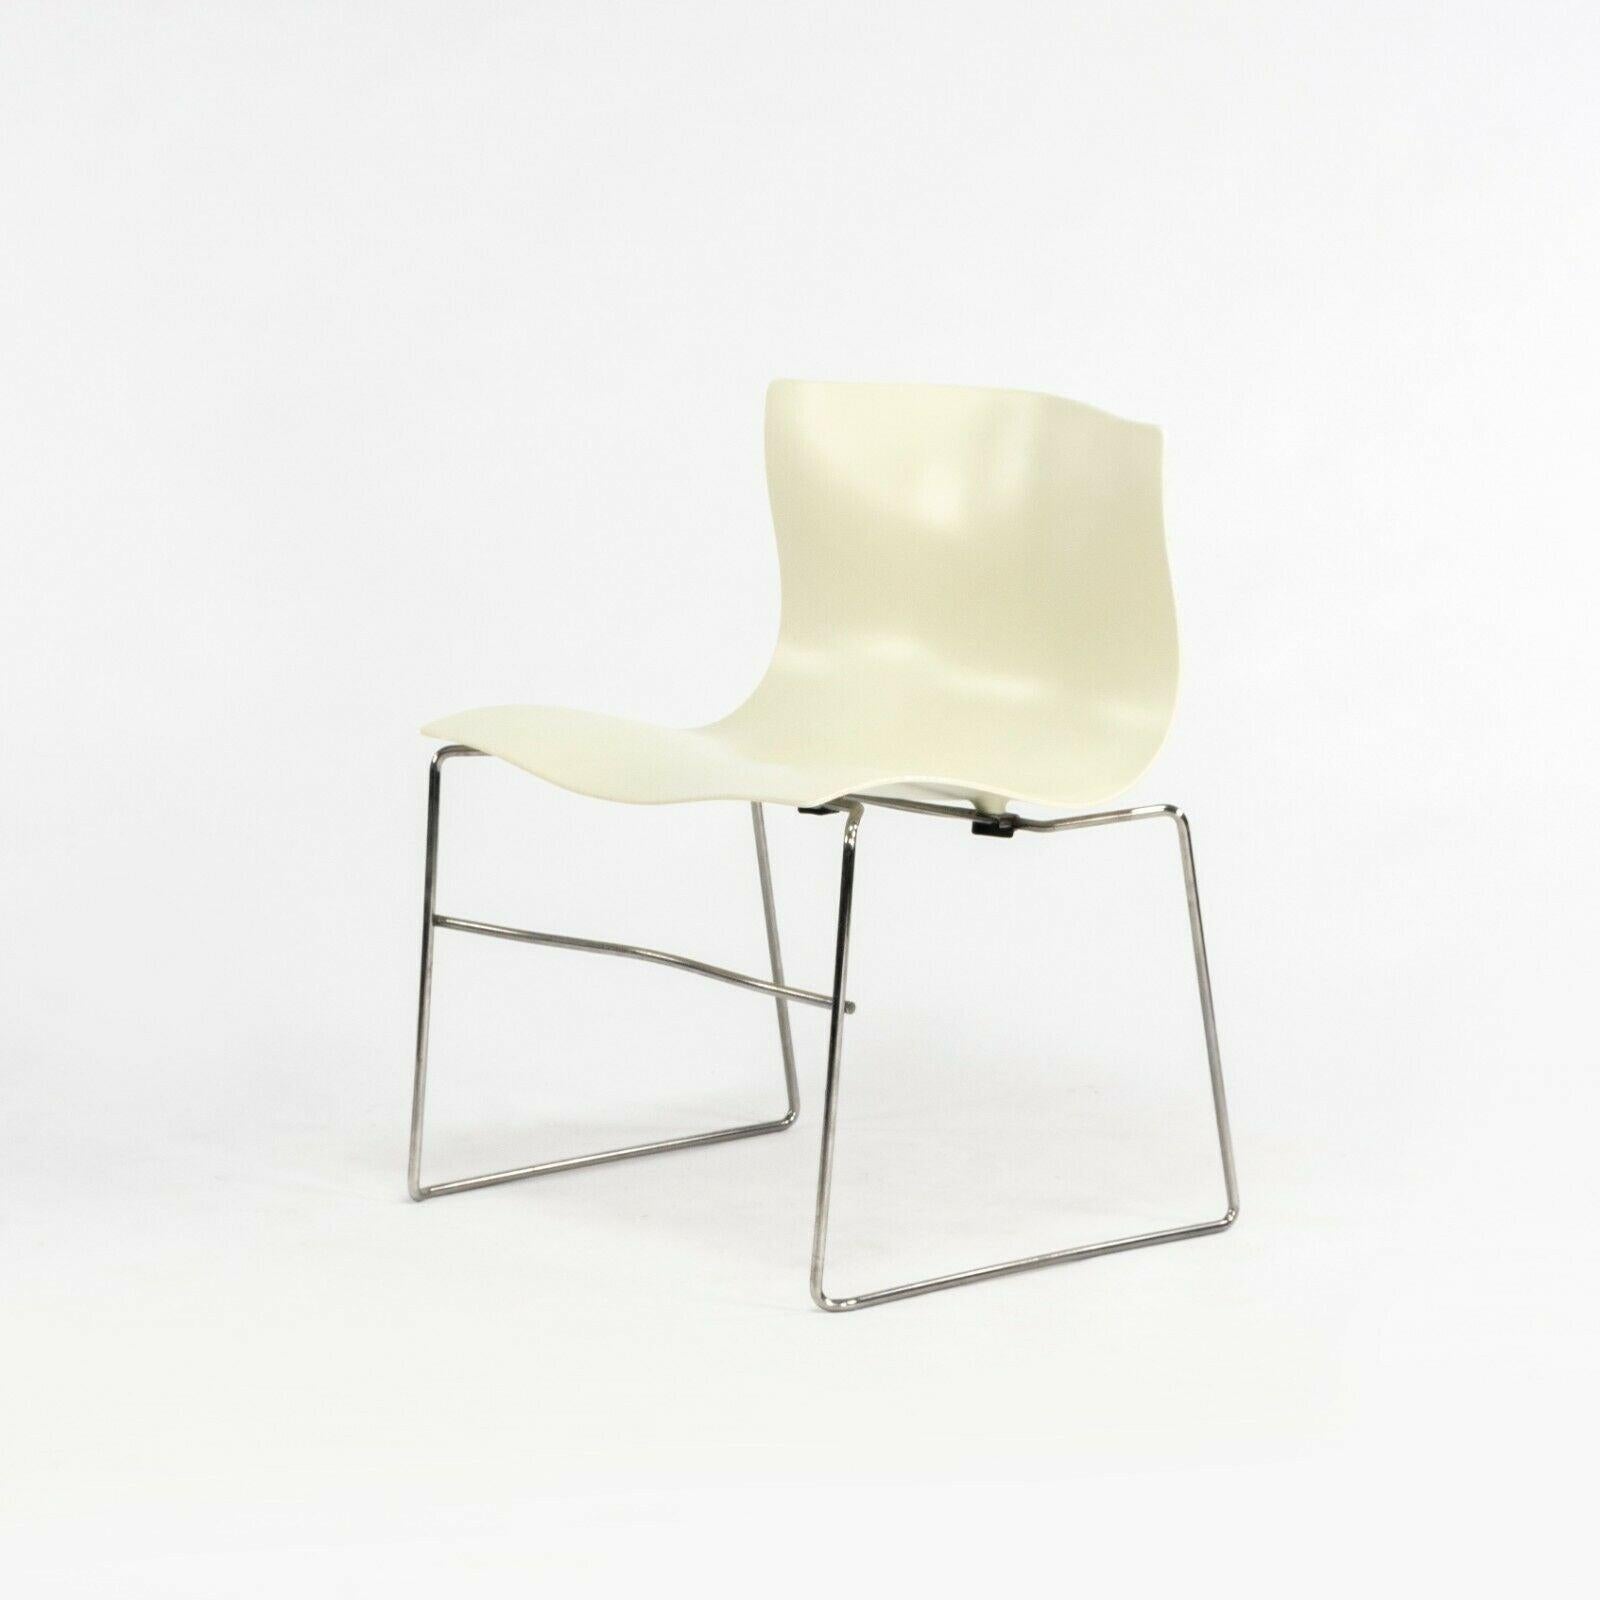 Late 20th Century 1992 Knoll H&kerchief Stacking Chairs by Massimo & Lella Vignelli 10x Available